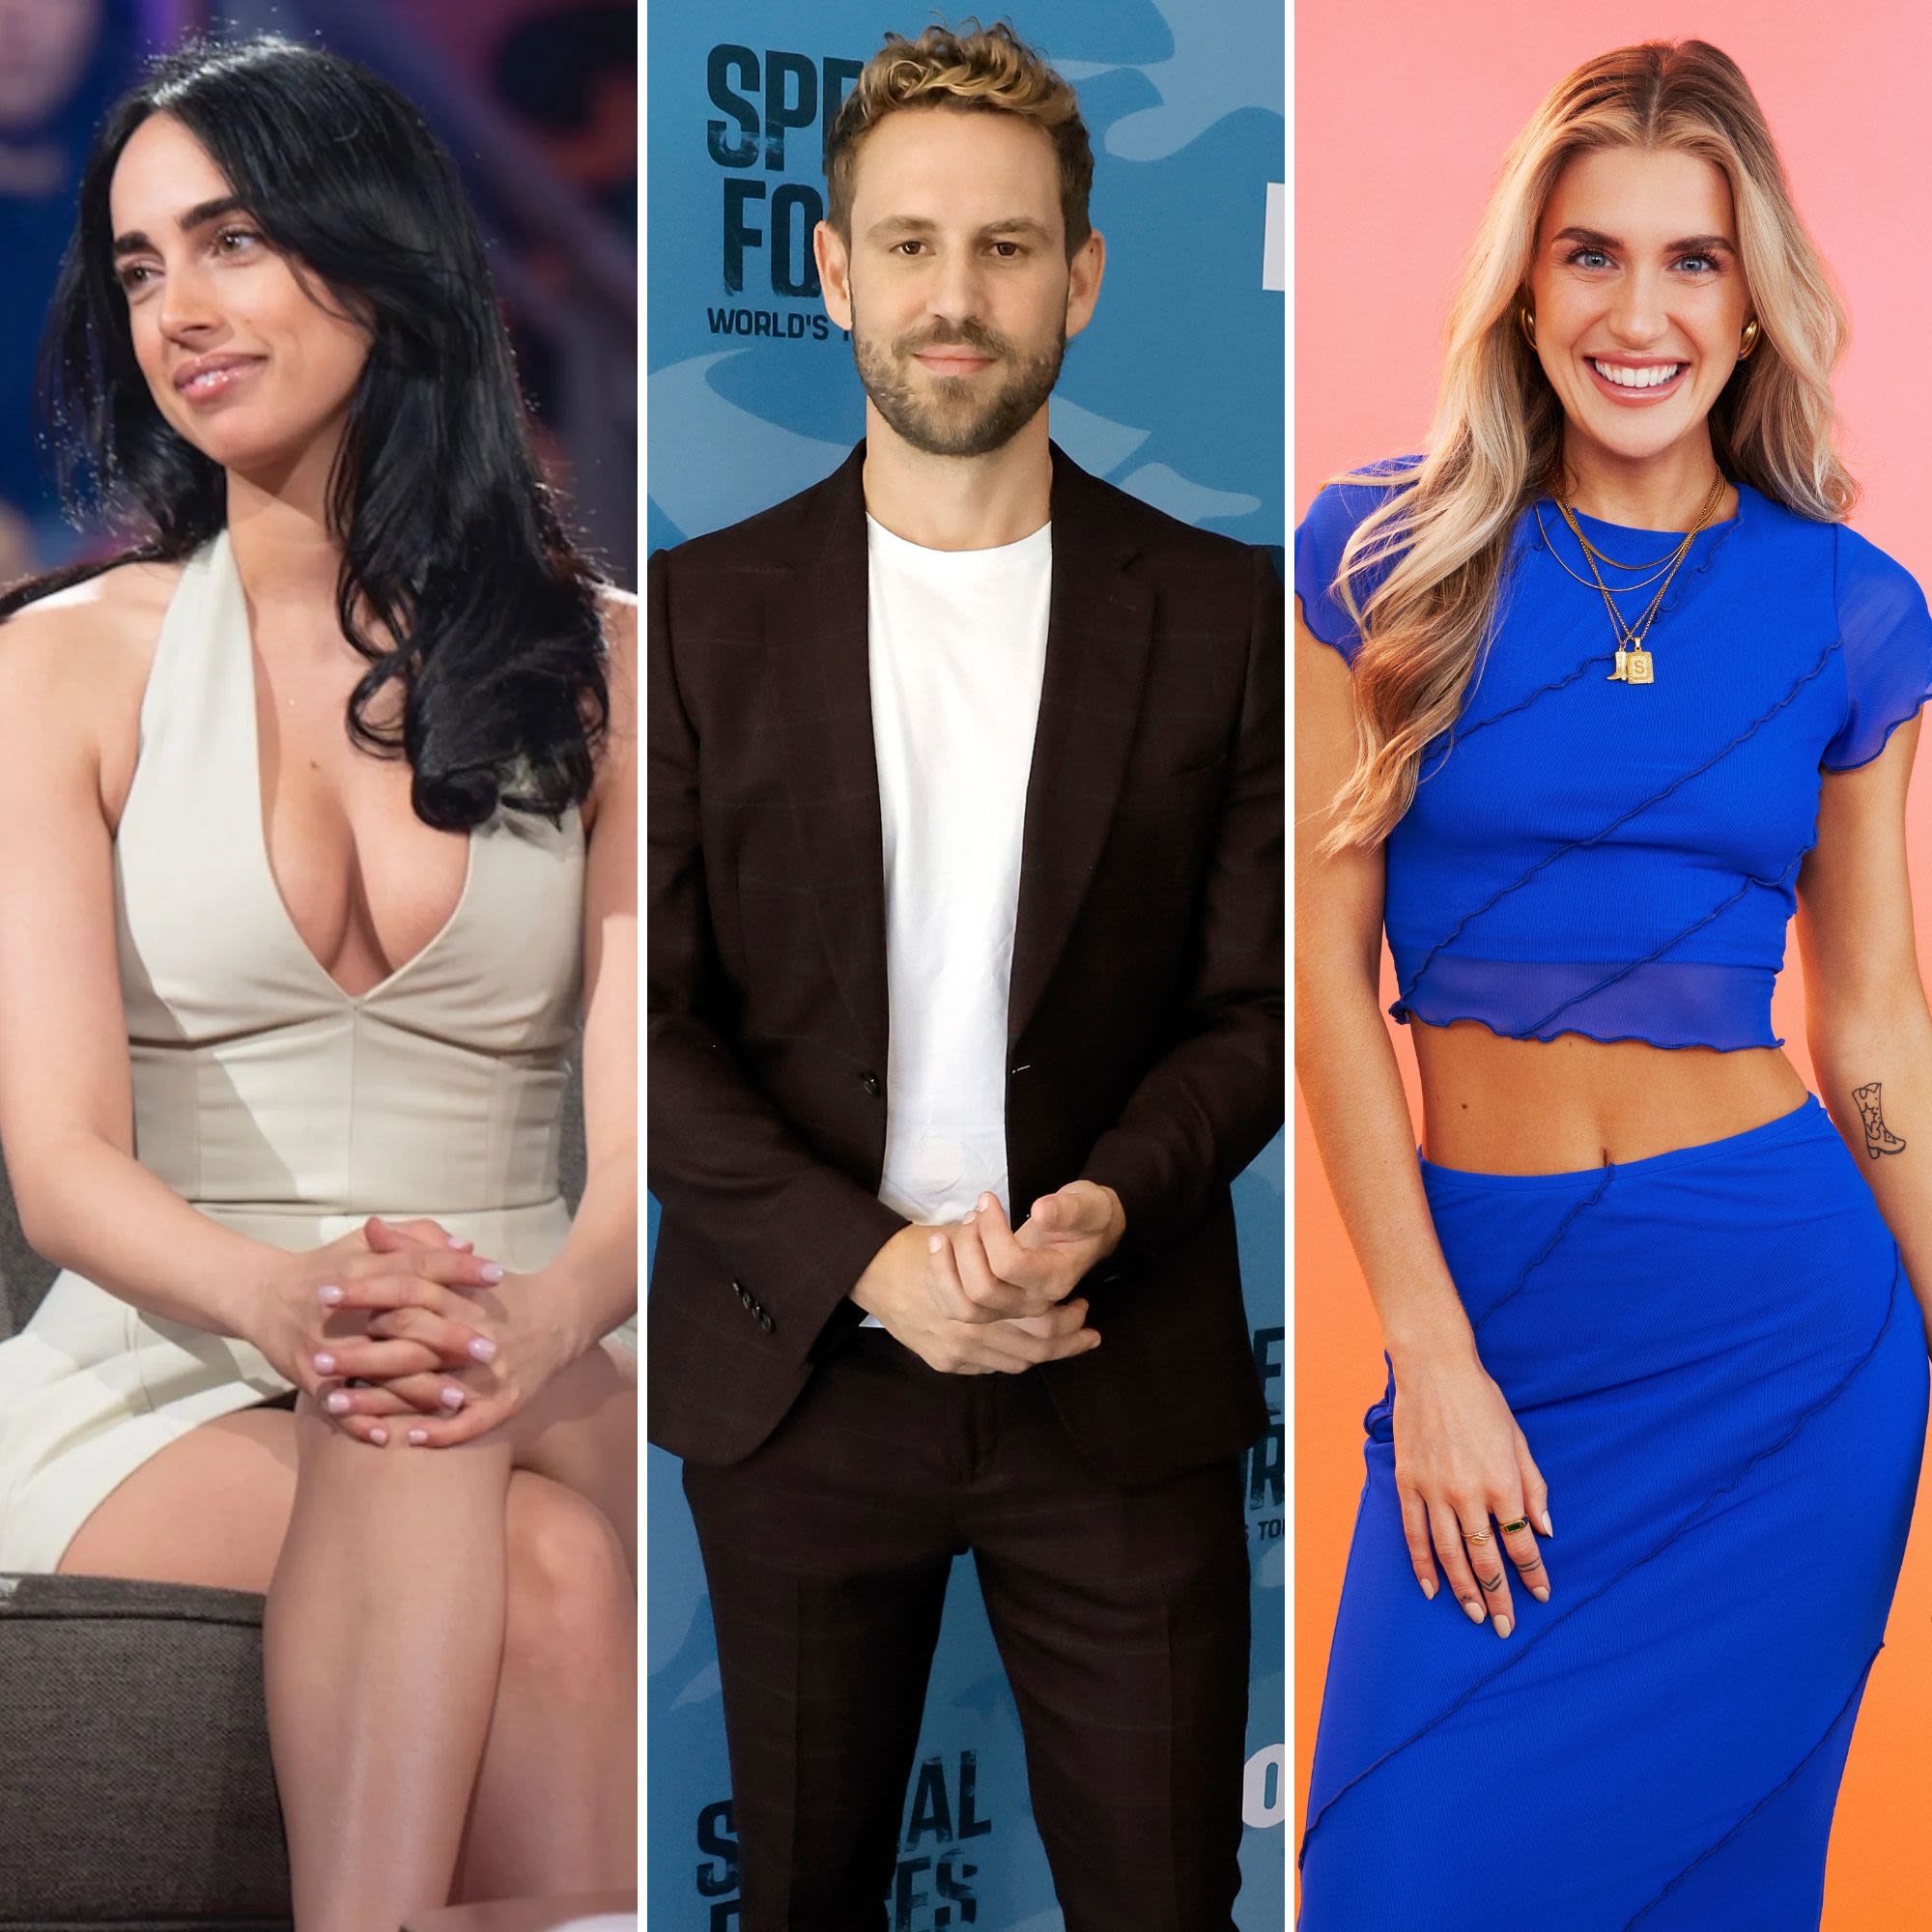 Bachelor’s Maria Georgas Suggests Nick Viall Conspired To Make Her the Villain During Sydney Feud